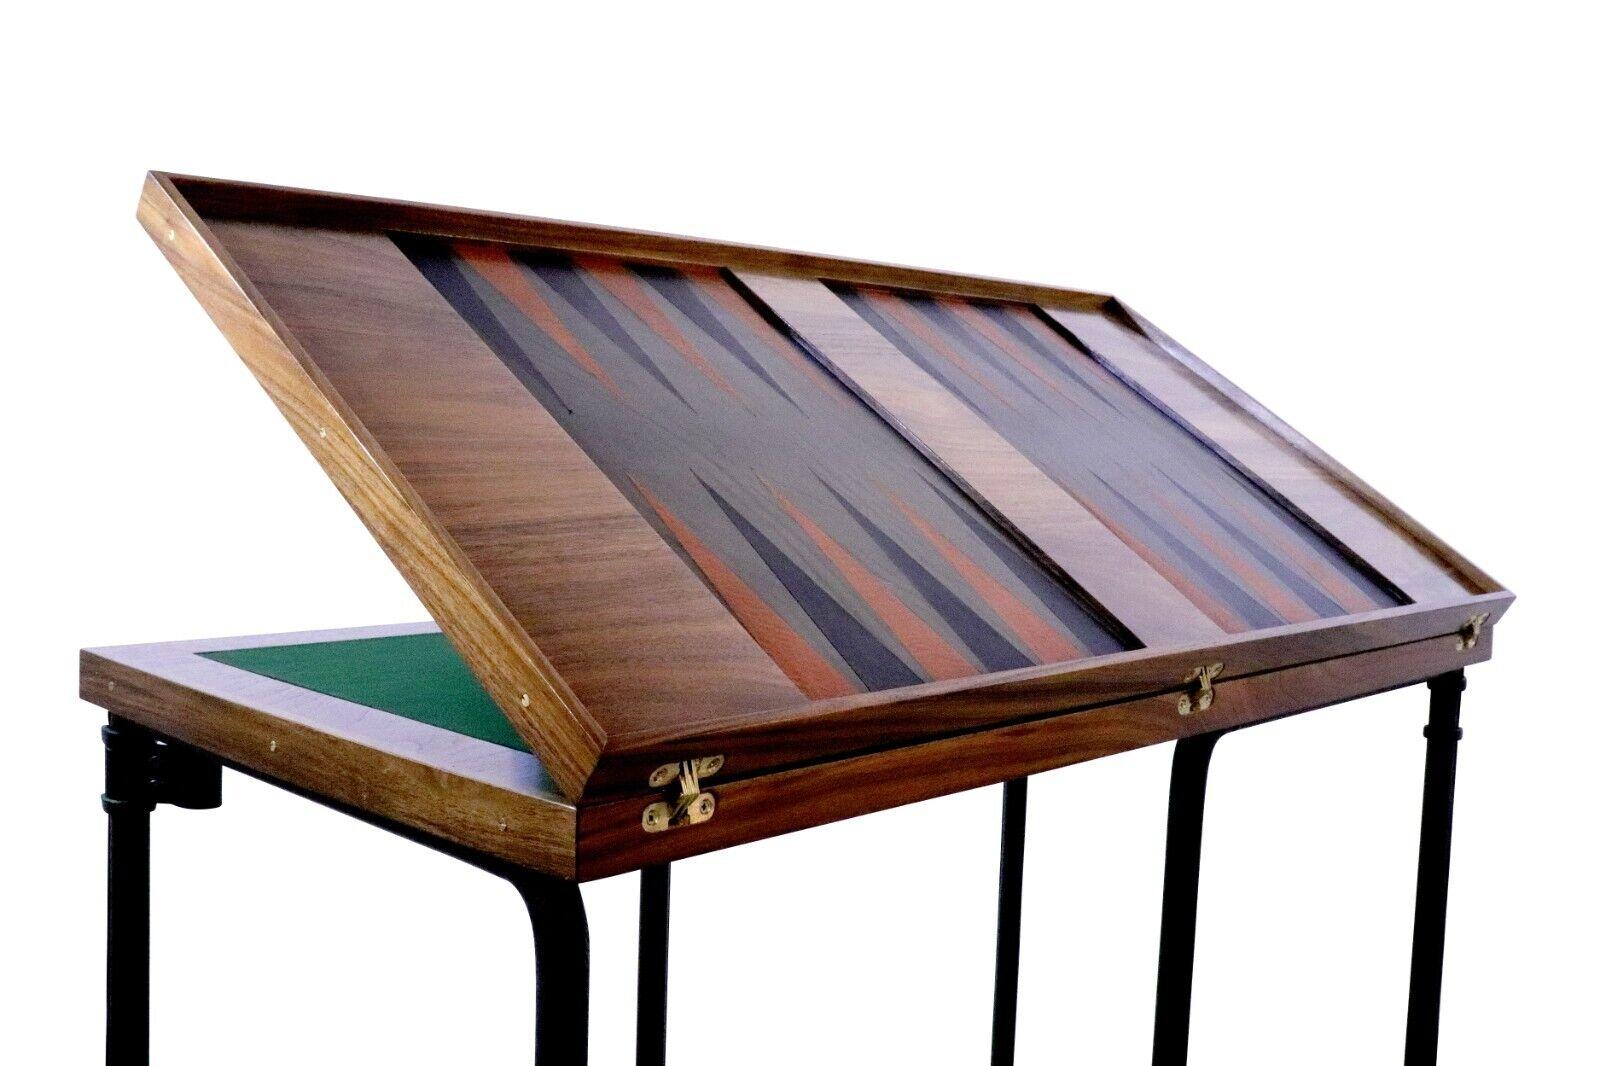 Made to order, these Games tables are of extremely high quality: bespoke made in England, the beautiful walnut and leather finish makes for a sophisticated games experience. The metamorphic folding hinge allows for diverse play (backgammon, drafts,